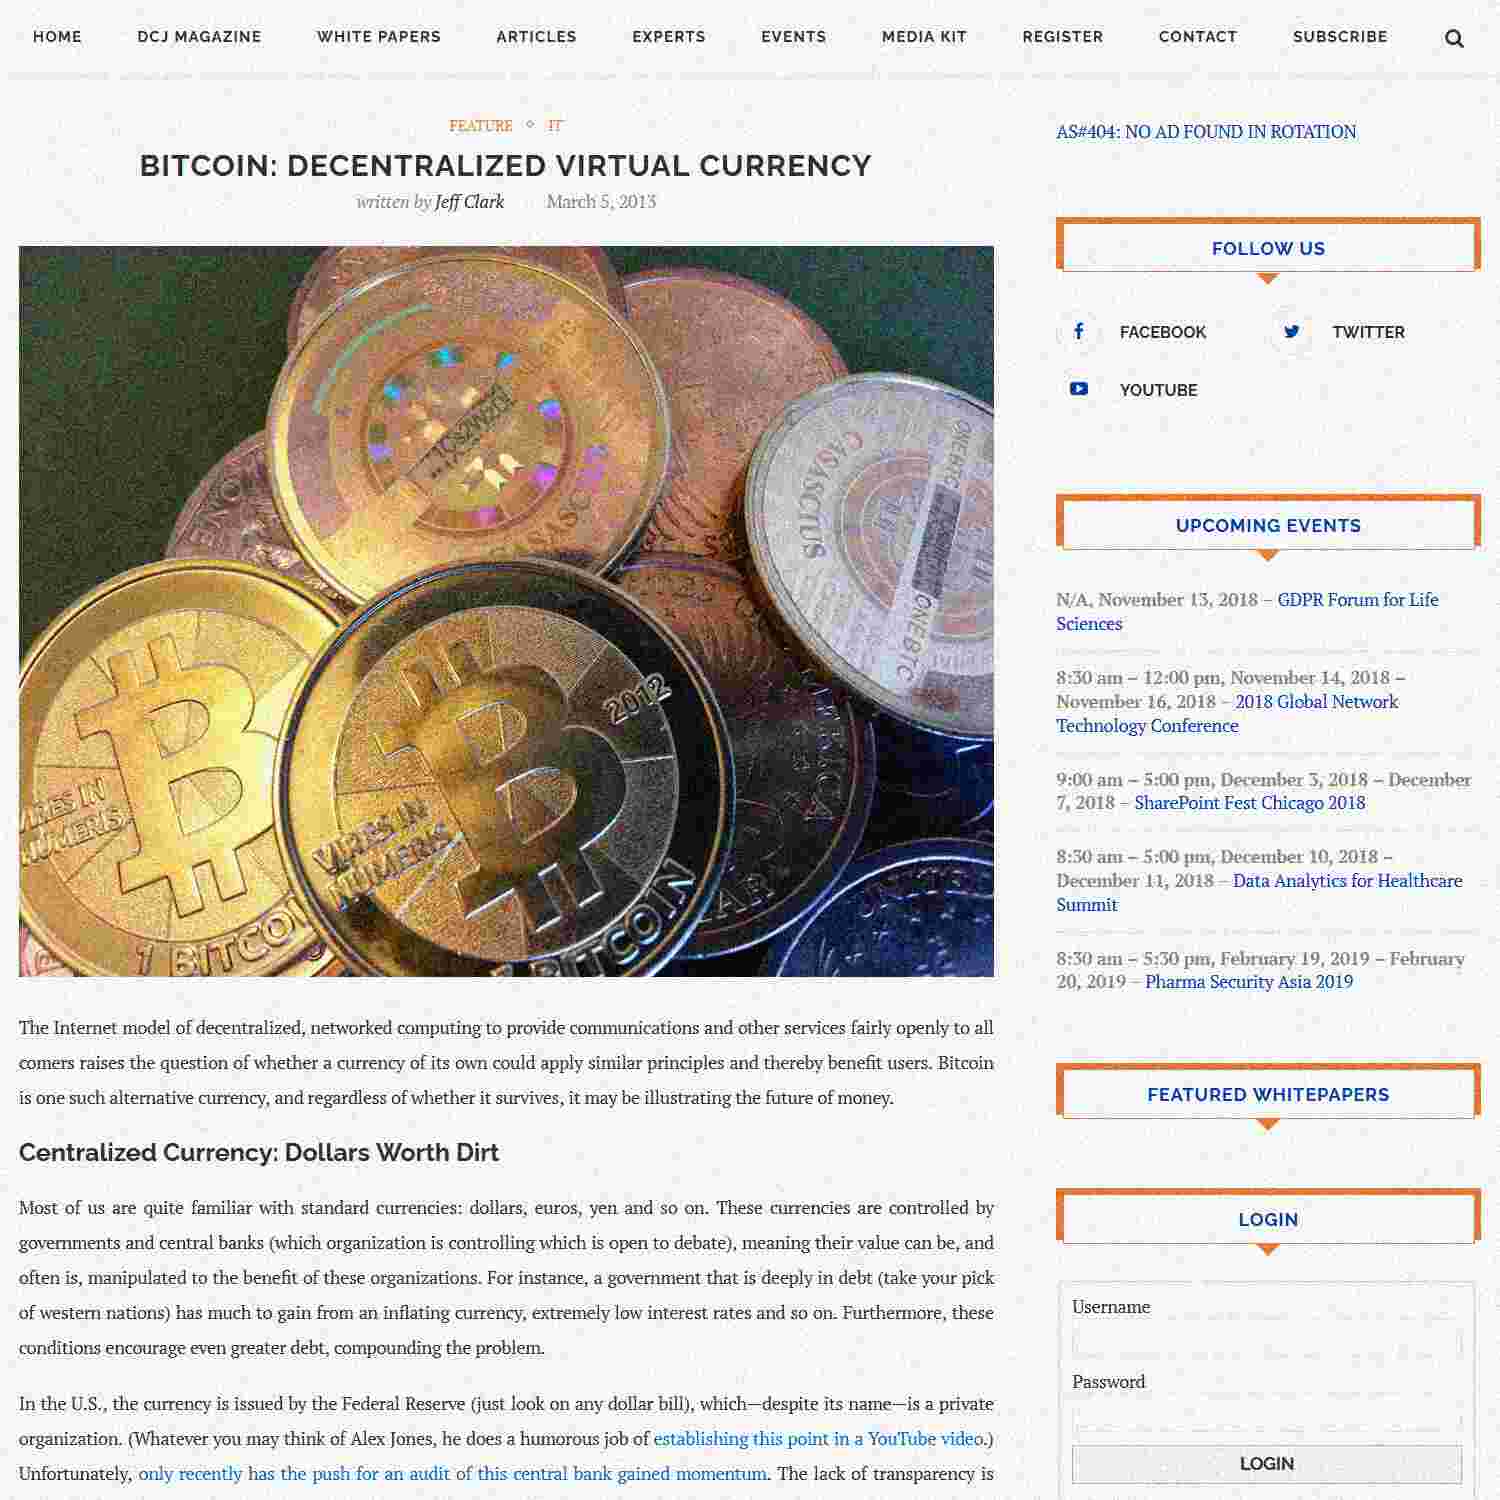 Illustration of Bitcoin: Decentralized Virtual Currency